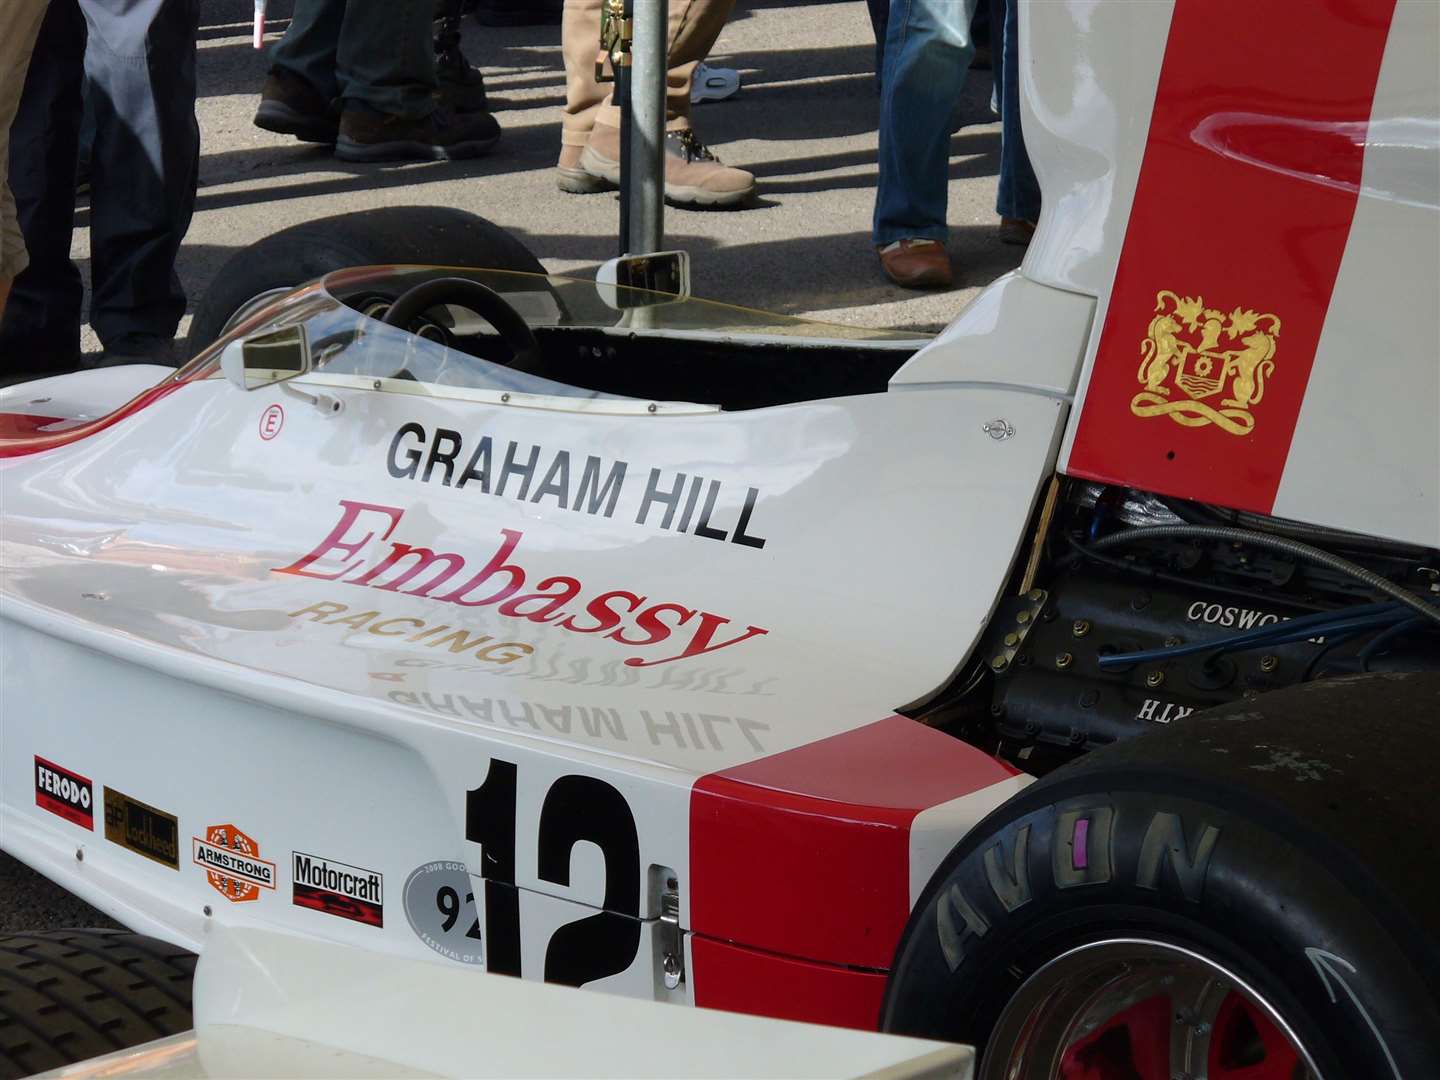 After switching from Shadow to Lola chassis, Hill's squad evolved the Lola into their own design – called the GH1 – in 1975. Brise handled the car that year and was set to race the new GH2 in 1976 before tragedy struck. Picture: Vic Wright